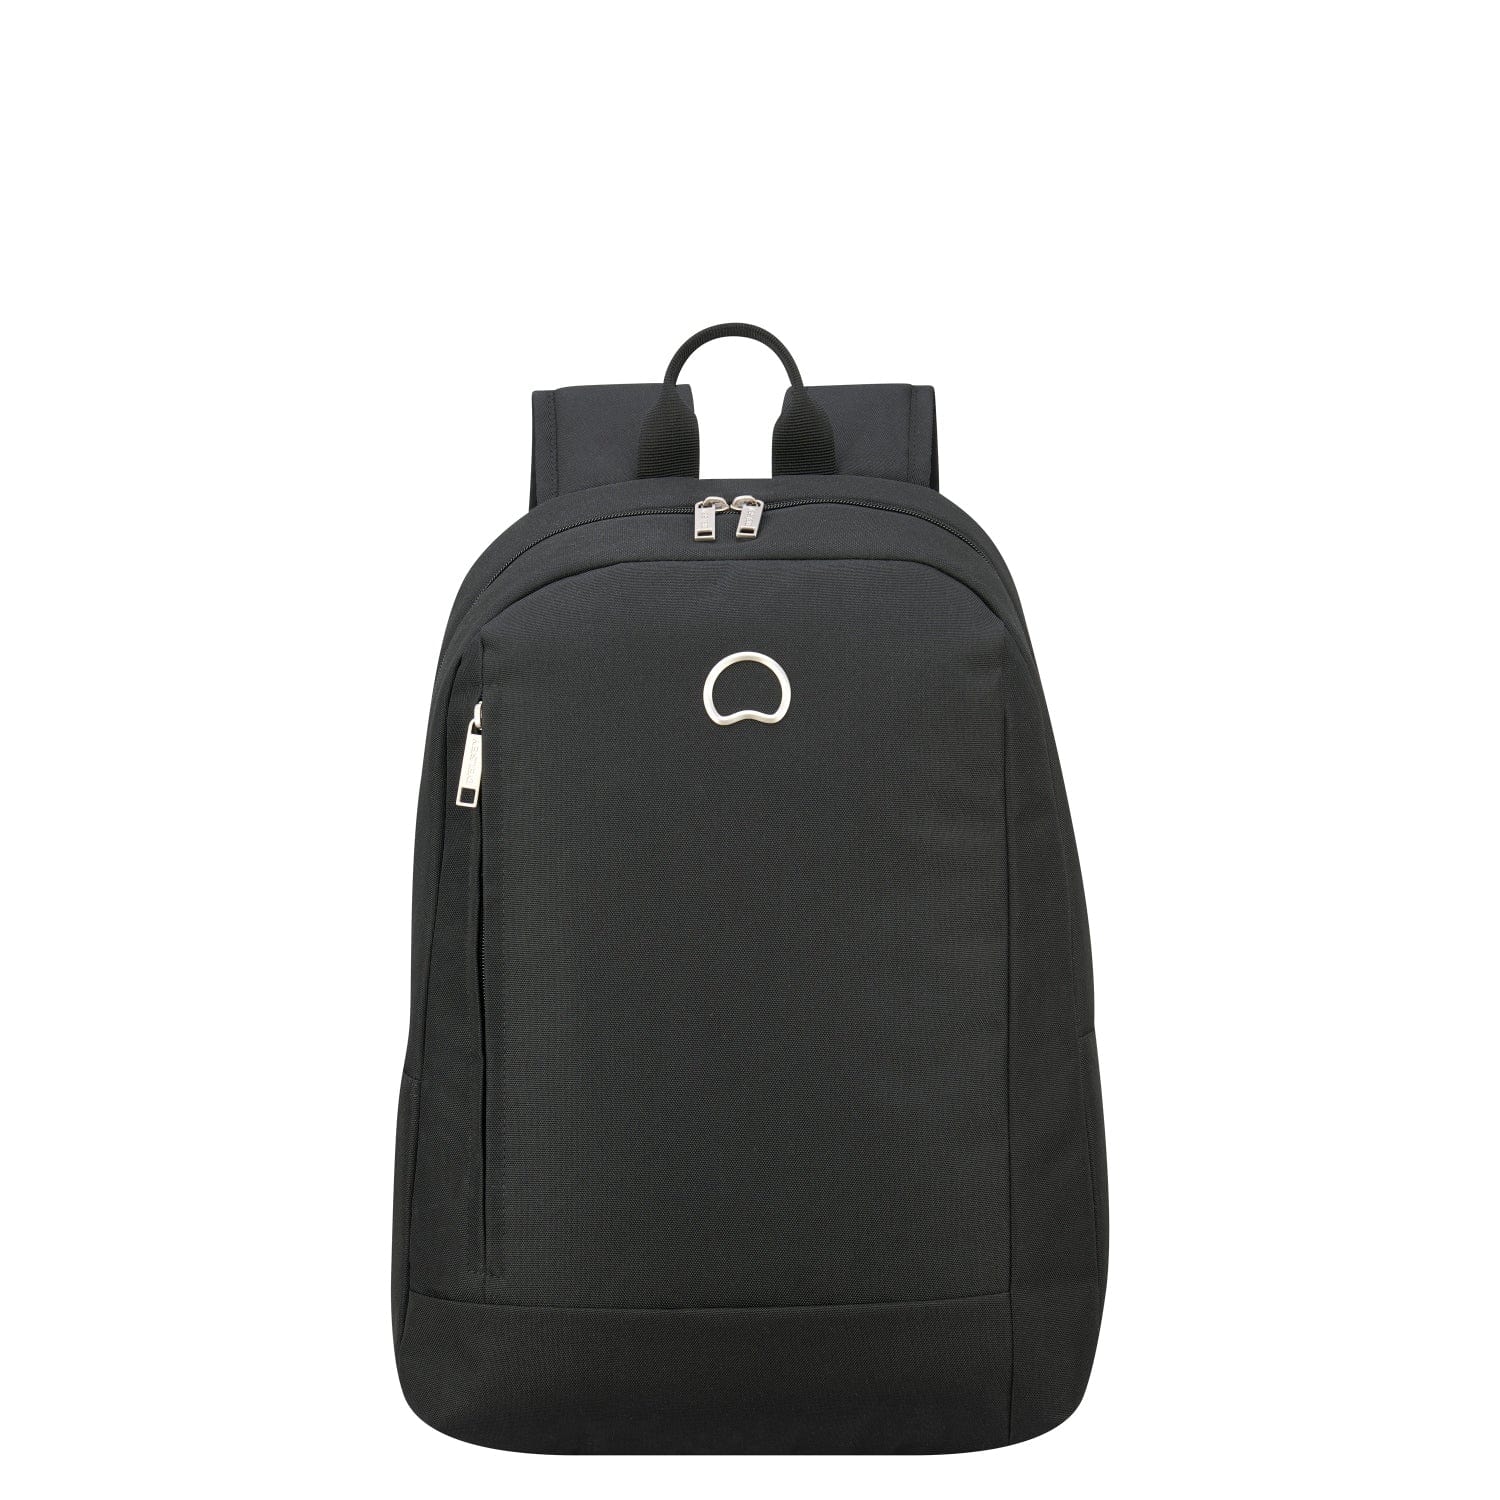 Delsey Airship 2pc Set + Aerian Backpack